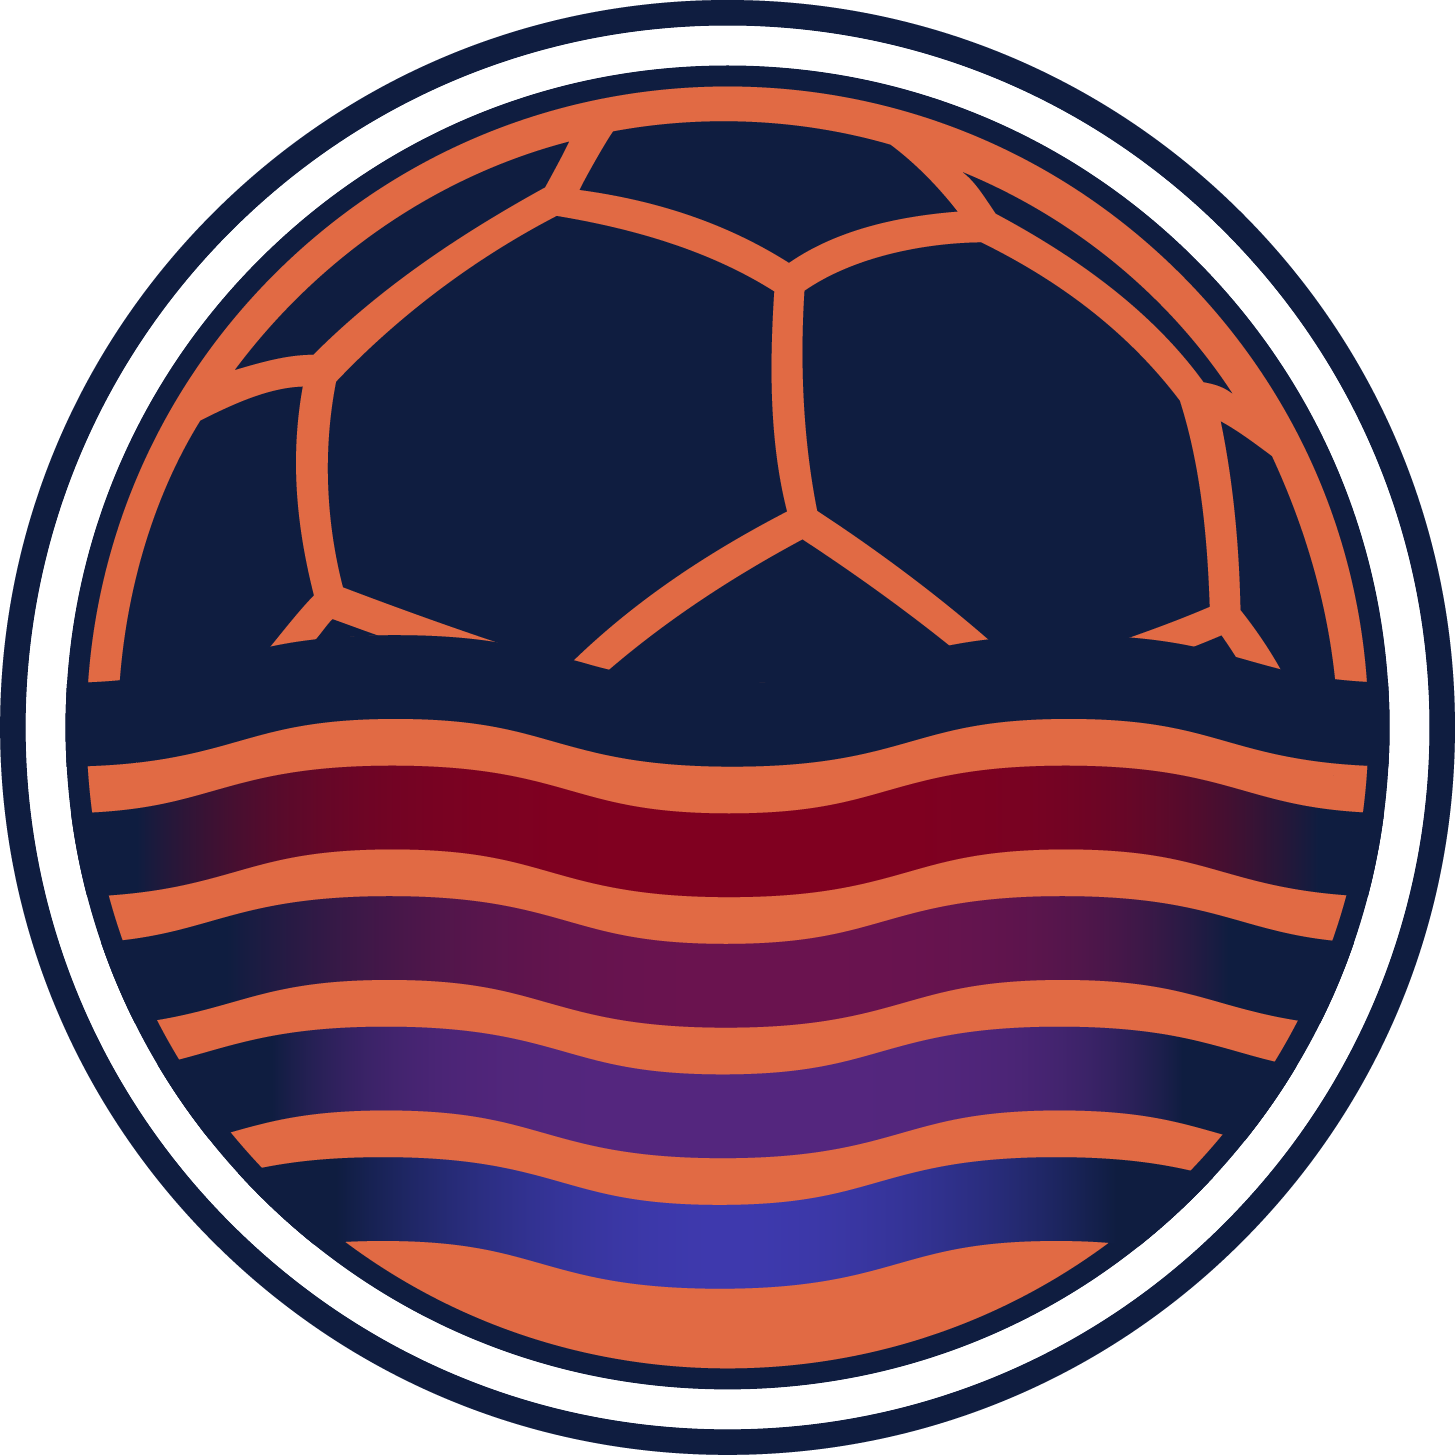 soccer ball club logo with navy orange red pink purple and blue waves